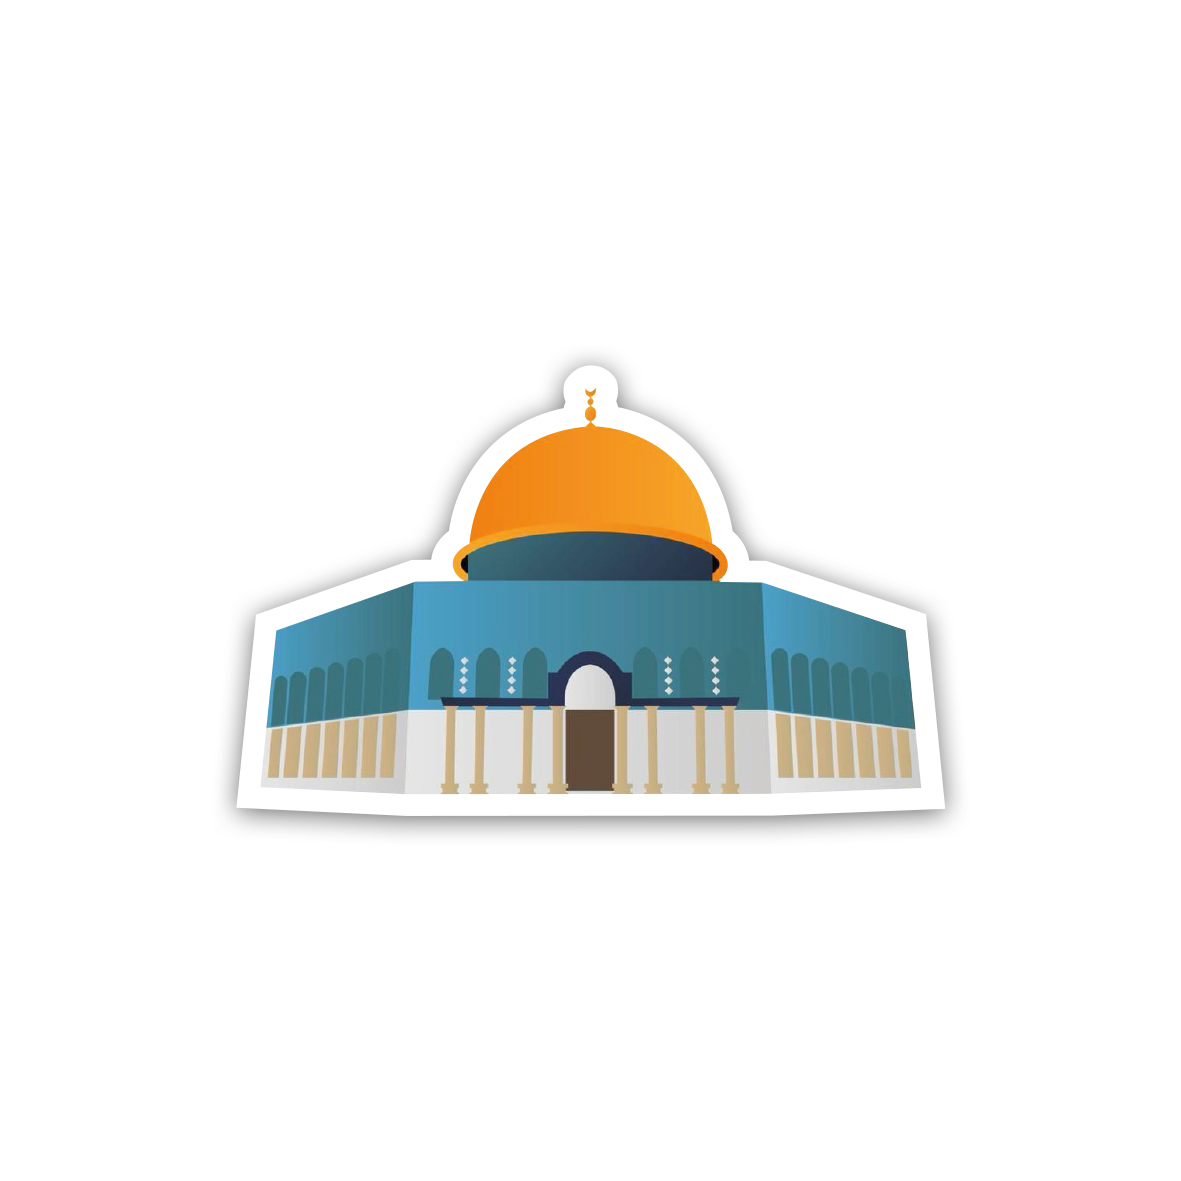 Dome of The Rock Mosque - Palestine 